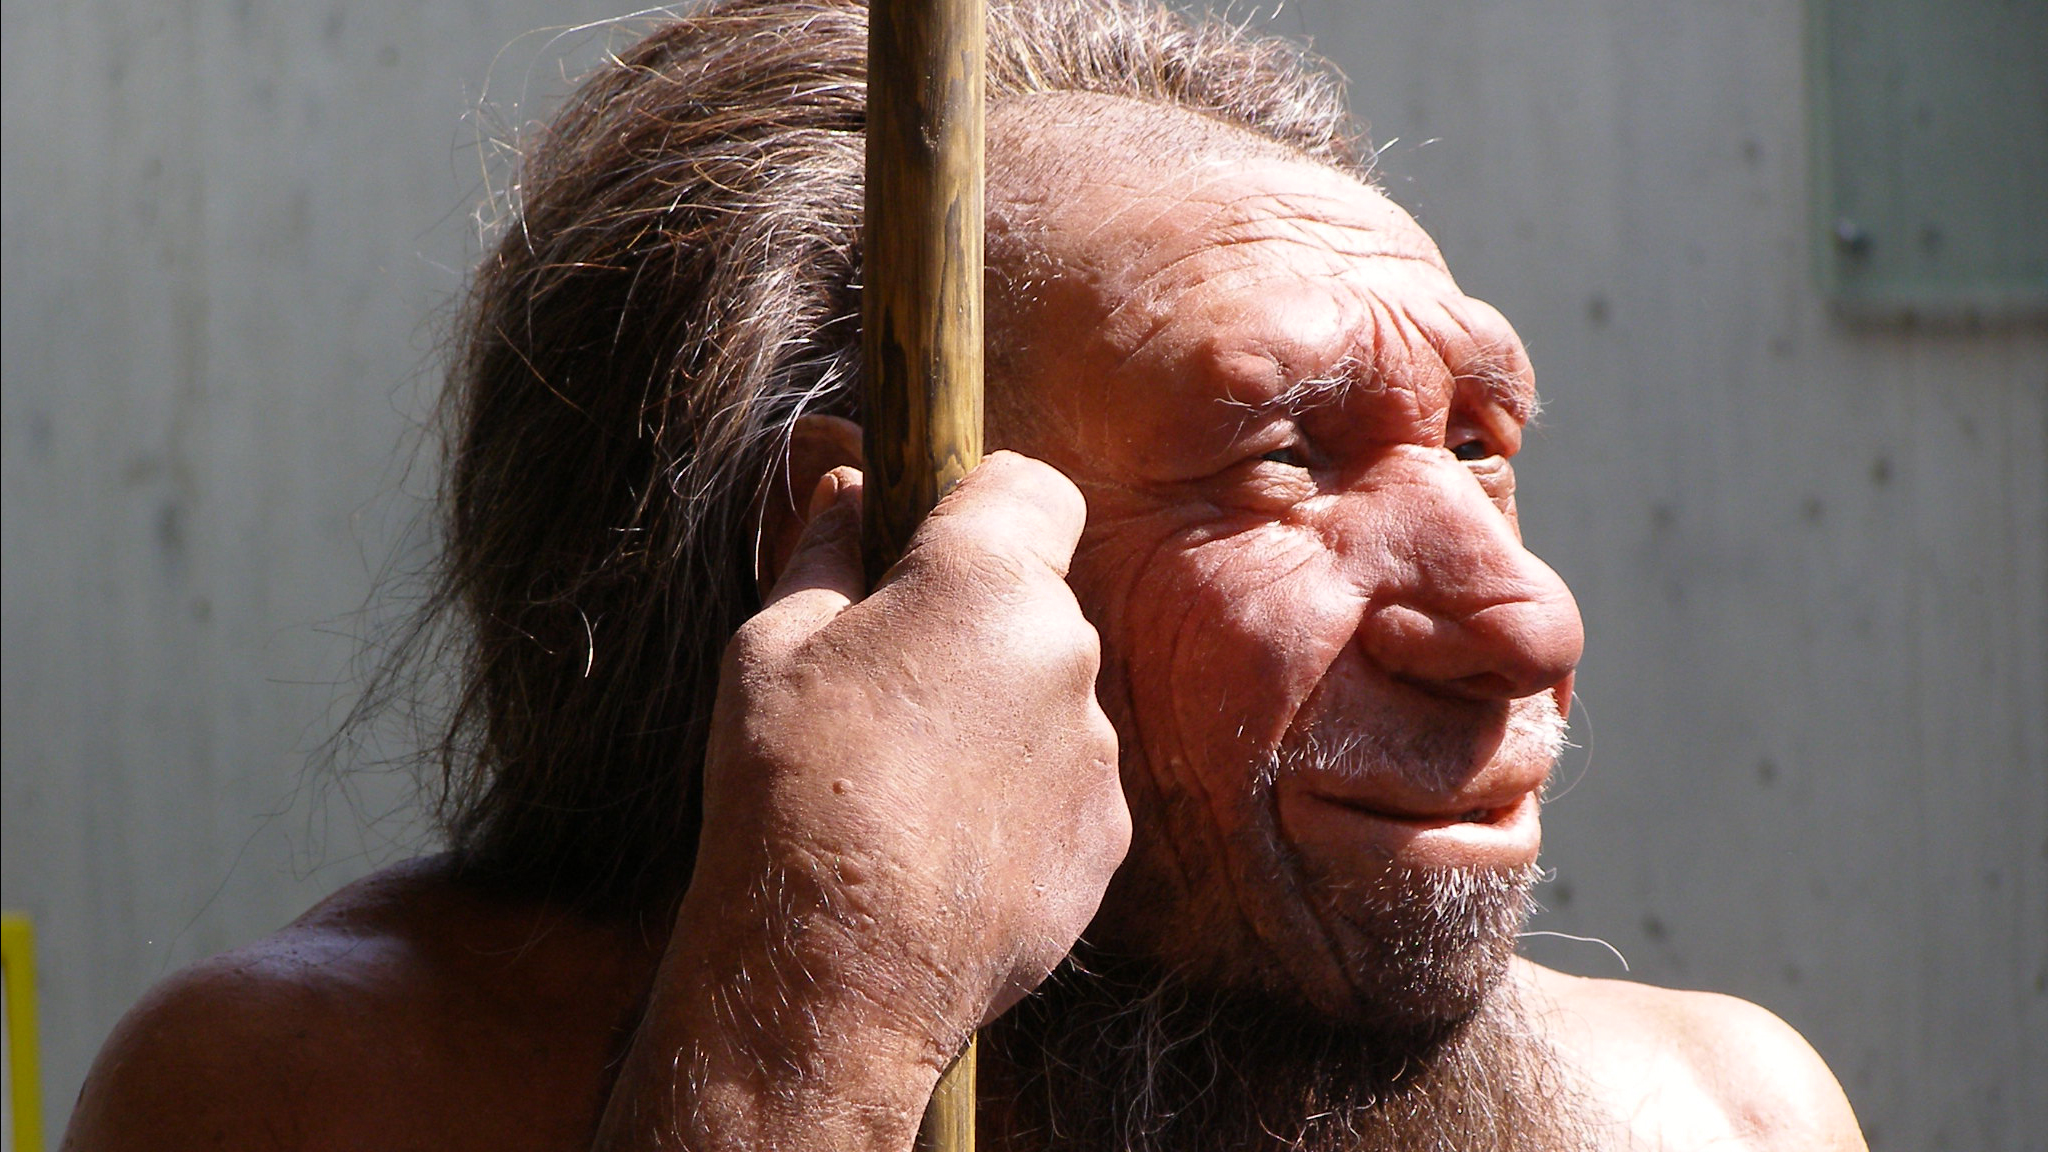 Neanderthal Museum exhibit (in Germany). Photo © Erich Ferdinand / Flickr through a Creative Commons license